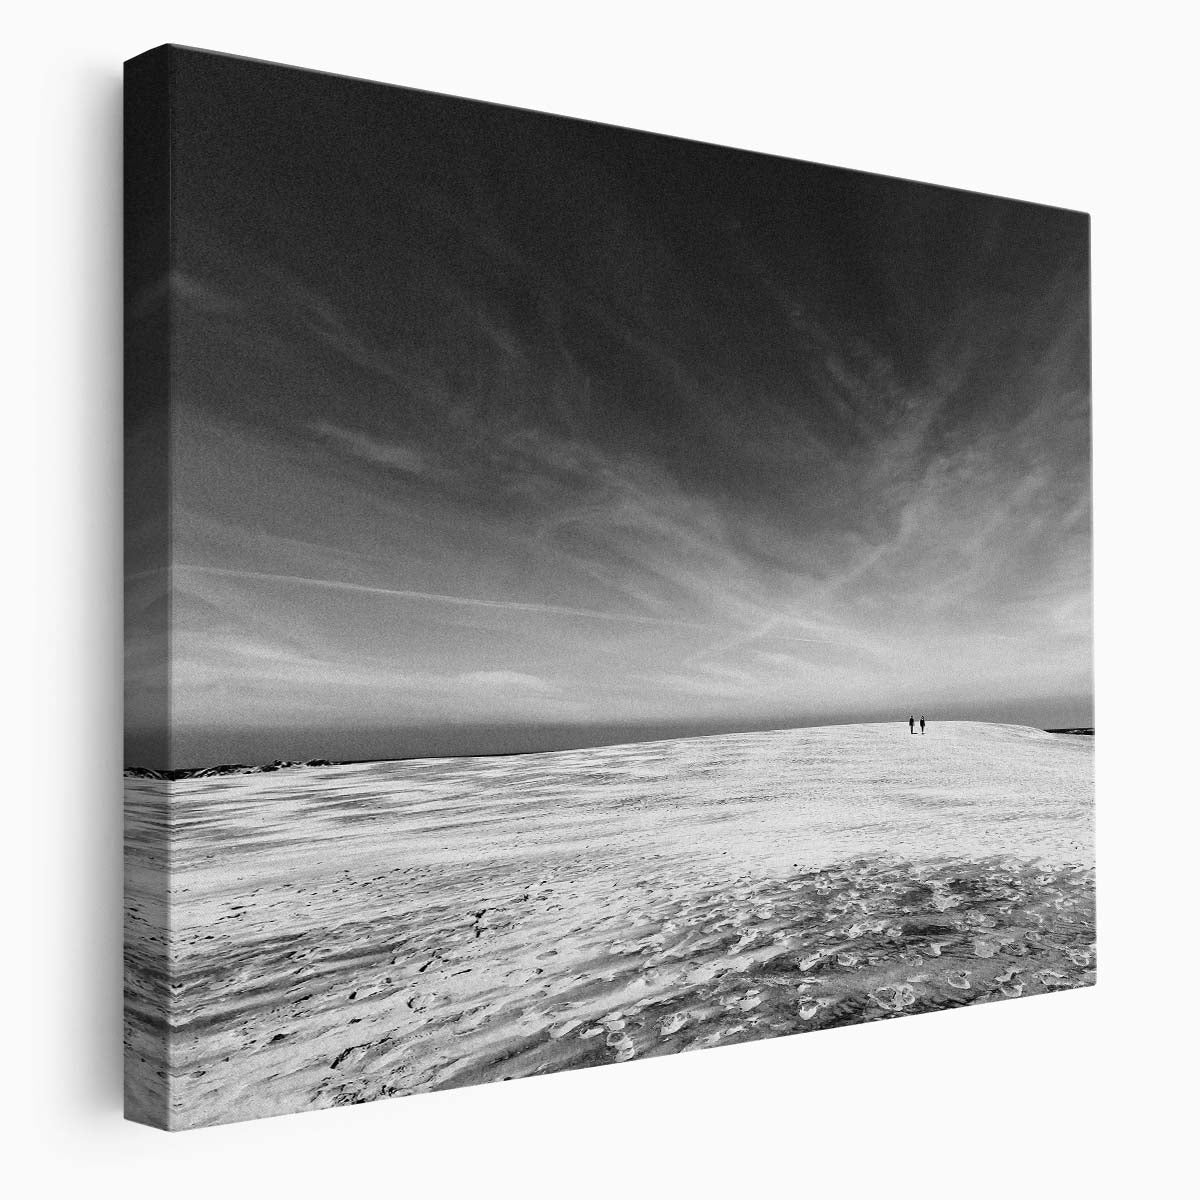 Solitary Couple in Snowy Landscape Monochrome Wall Art by Luxuriance Designs. Made in USA.